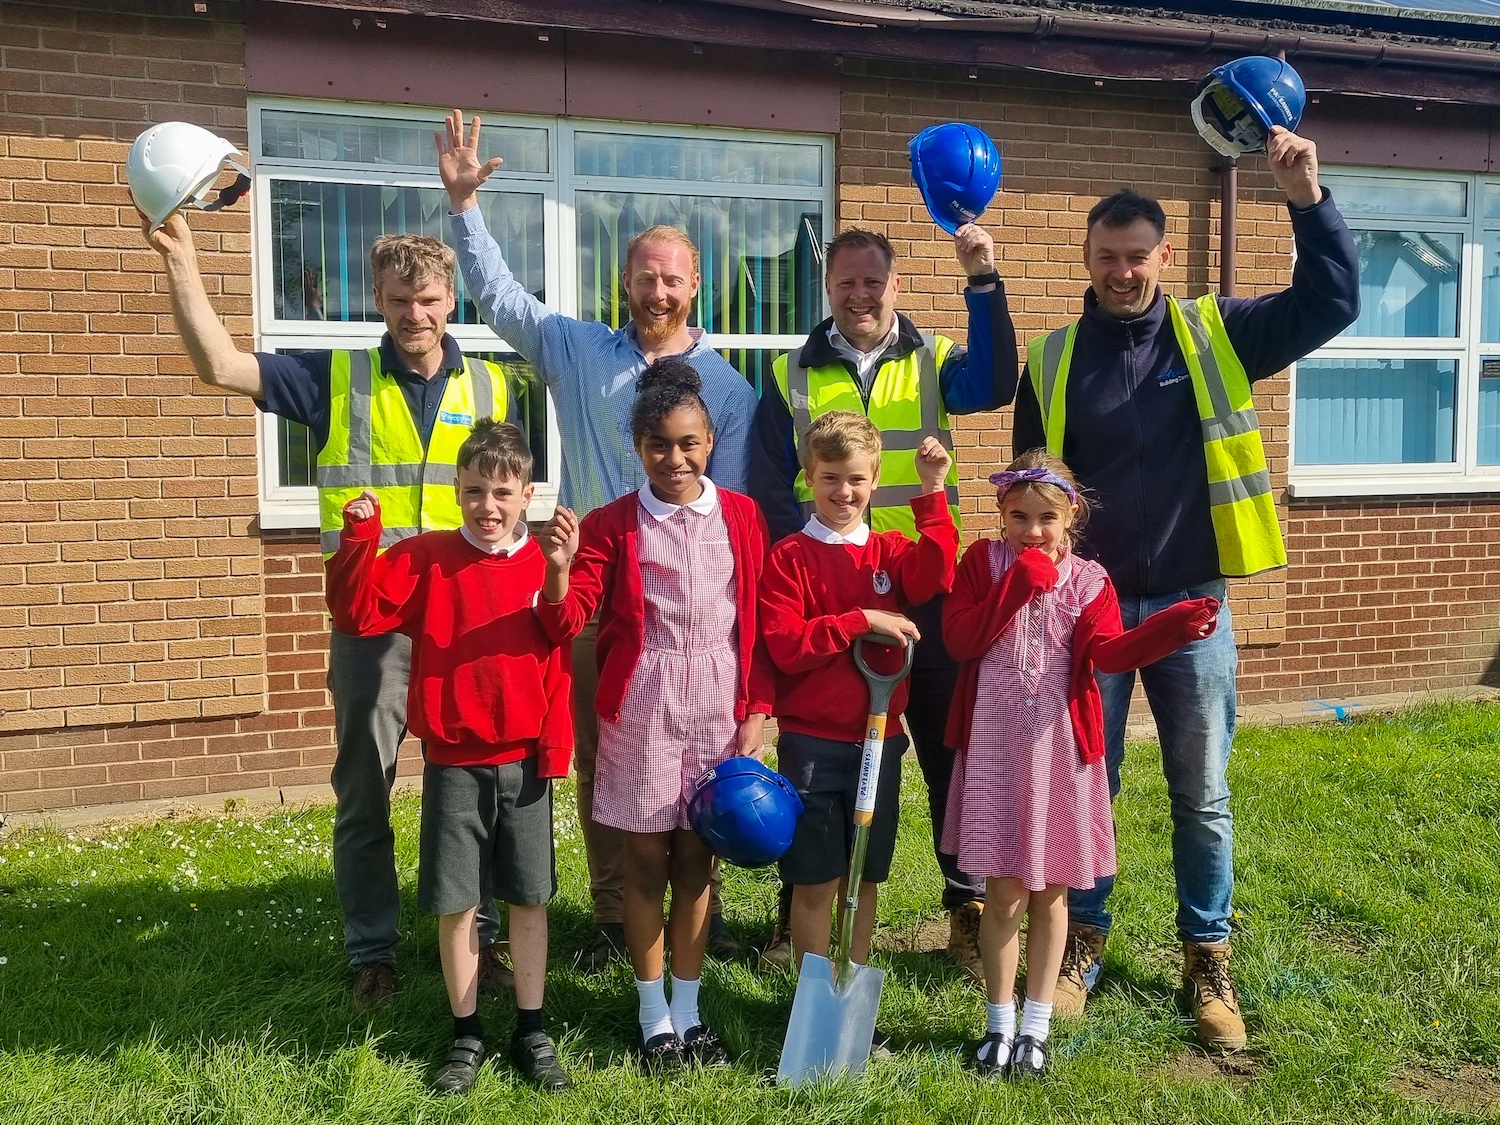 (L-R) Senior architectural technologist at Property Services Group Martin Ellis, head teacher Carl Rogers, Pave Aways’ construction director Jamie Evans and site manager Dan Owen celebrate the start of work at Whittington with some of the pupils